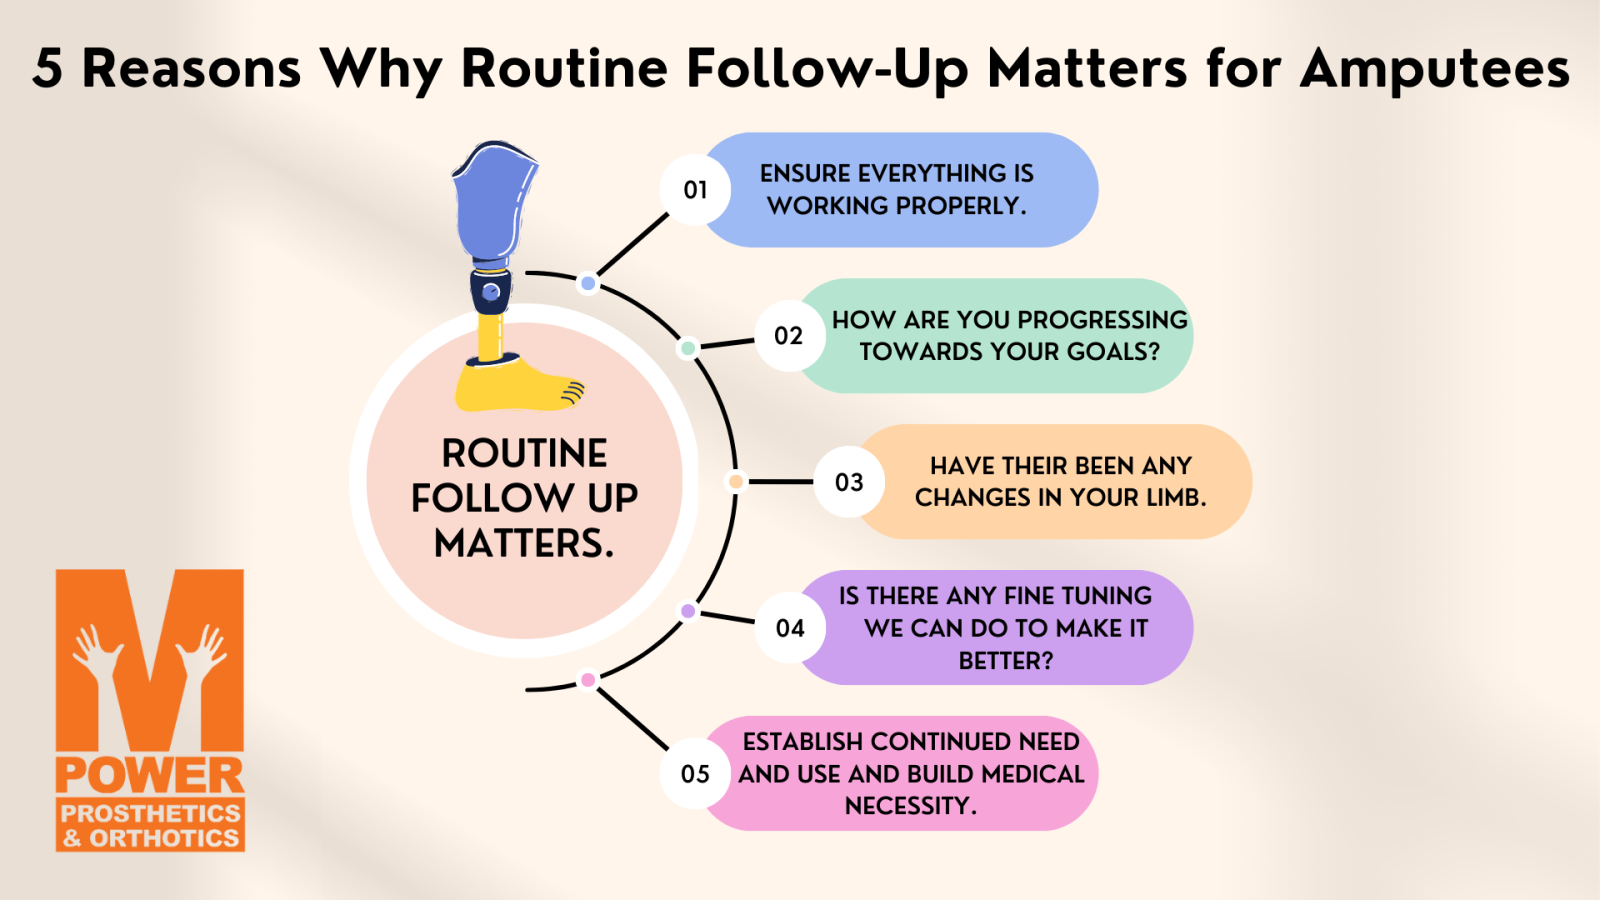 5%20Reasons%20Why%20Routine%20Follow%20Up%20Matters%20for%20Amputees%20WS%20(1).png